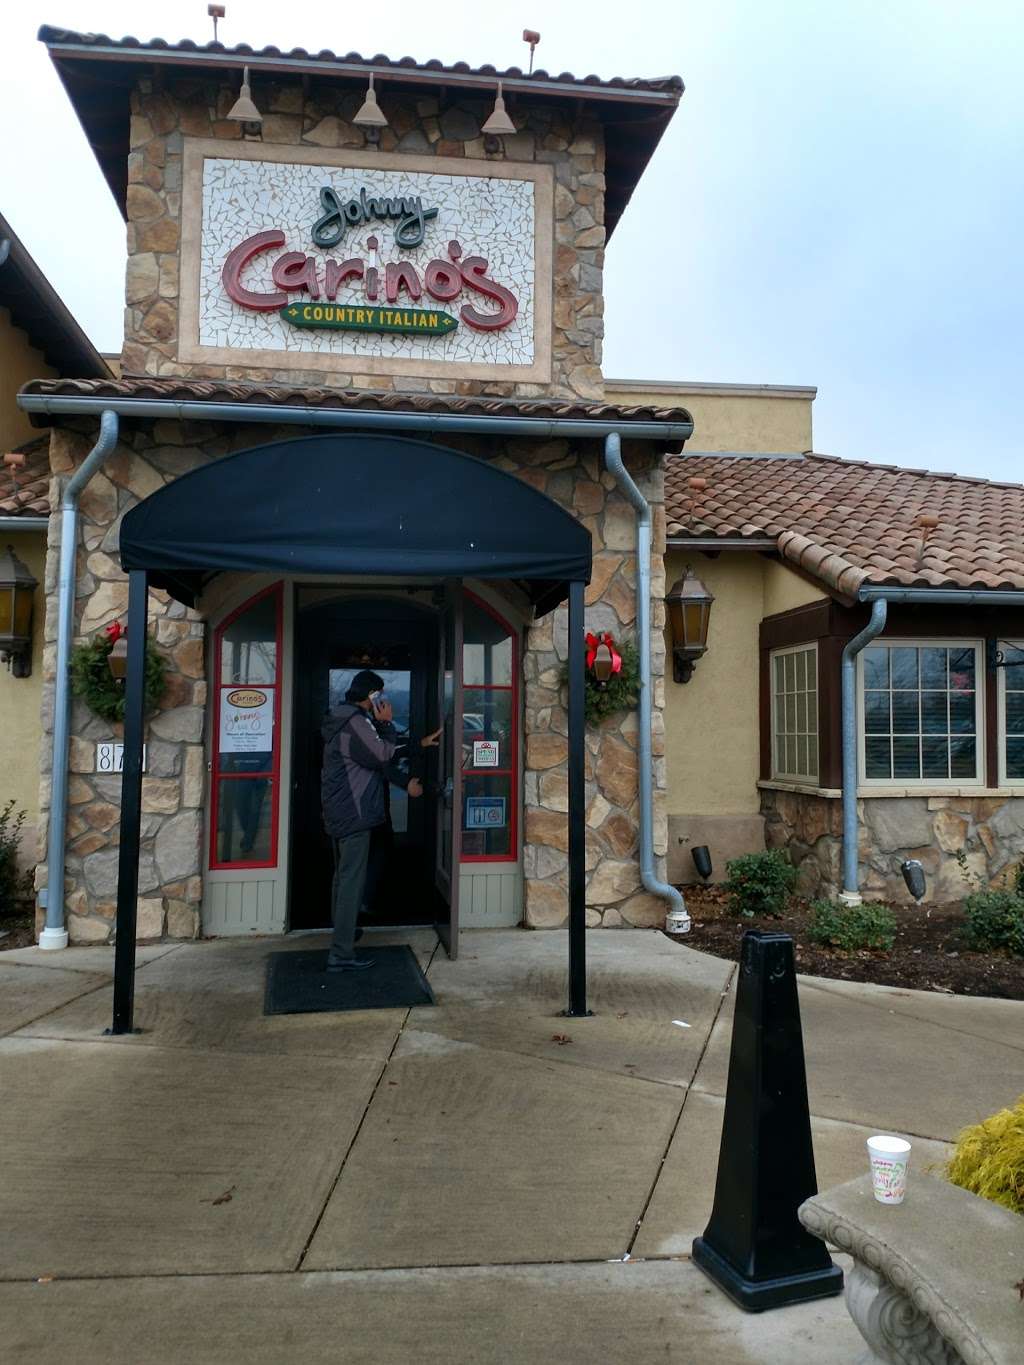 Johnny Carinos | 870 Creekview Dr, Columbus, IN 47201 | Phone: (812) 372-2266